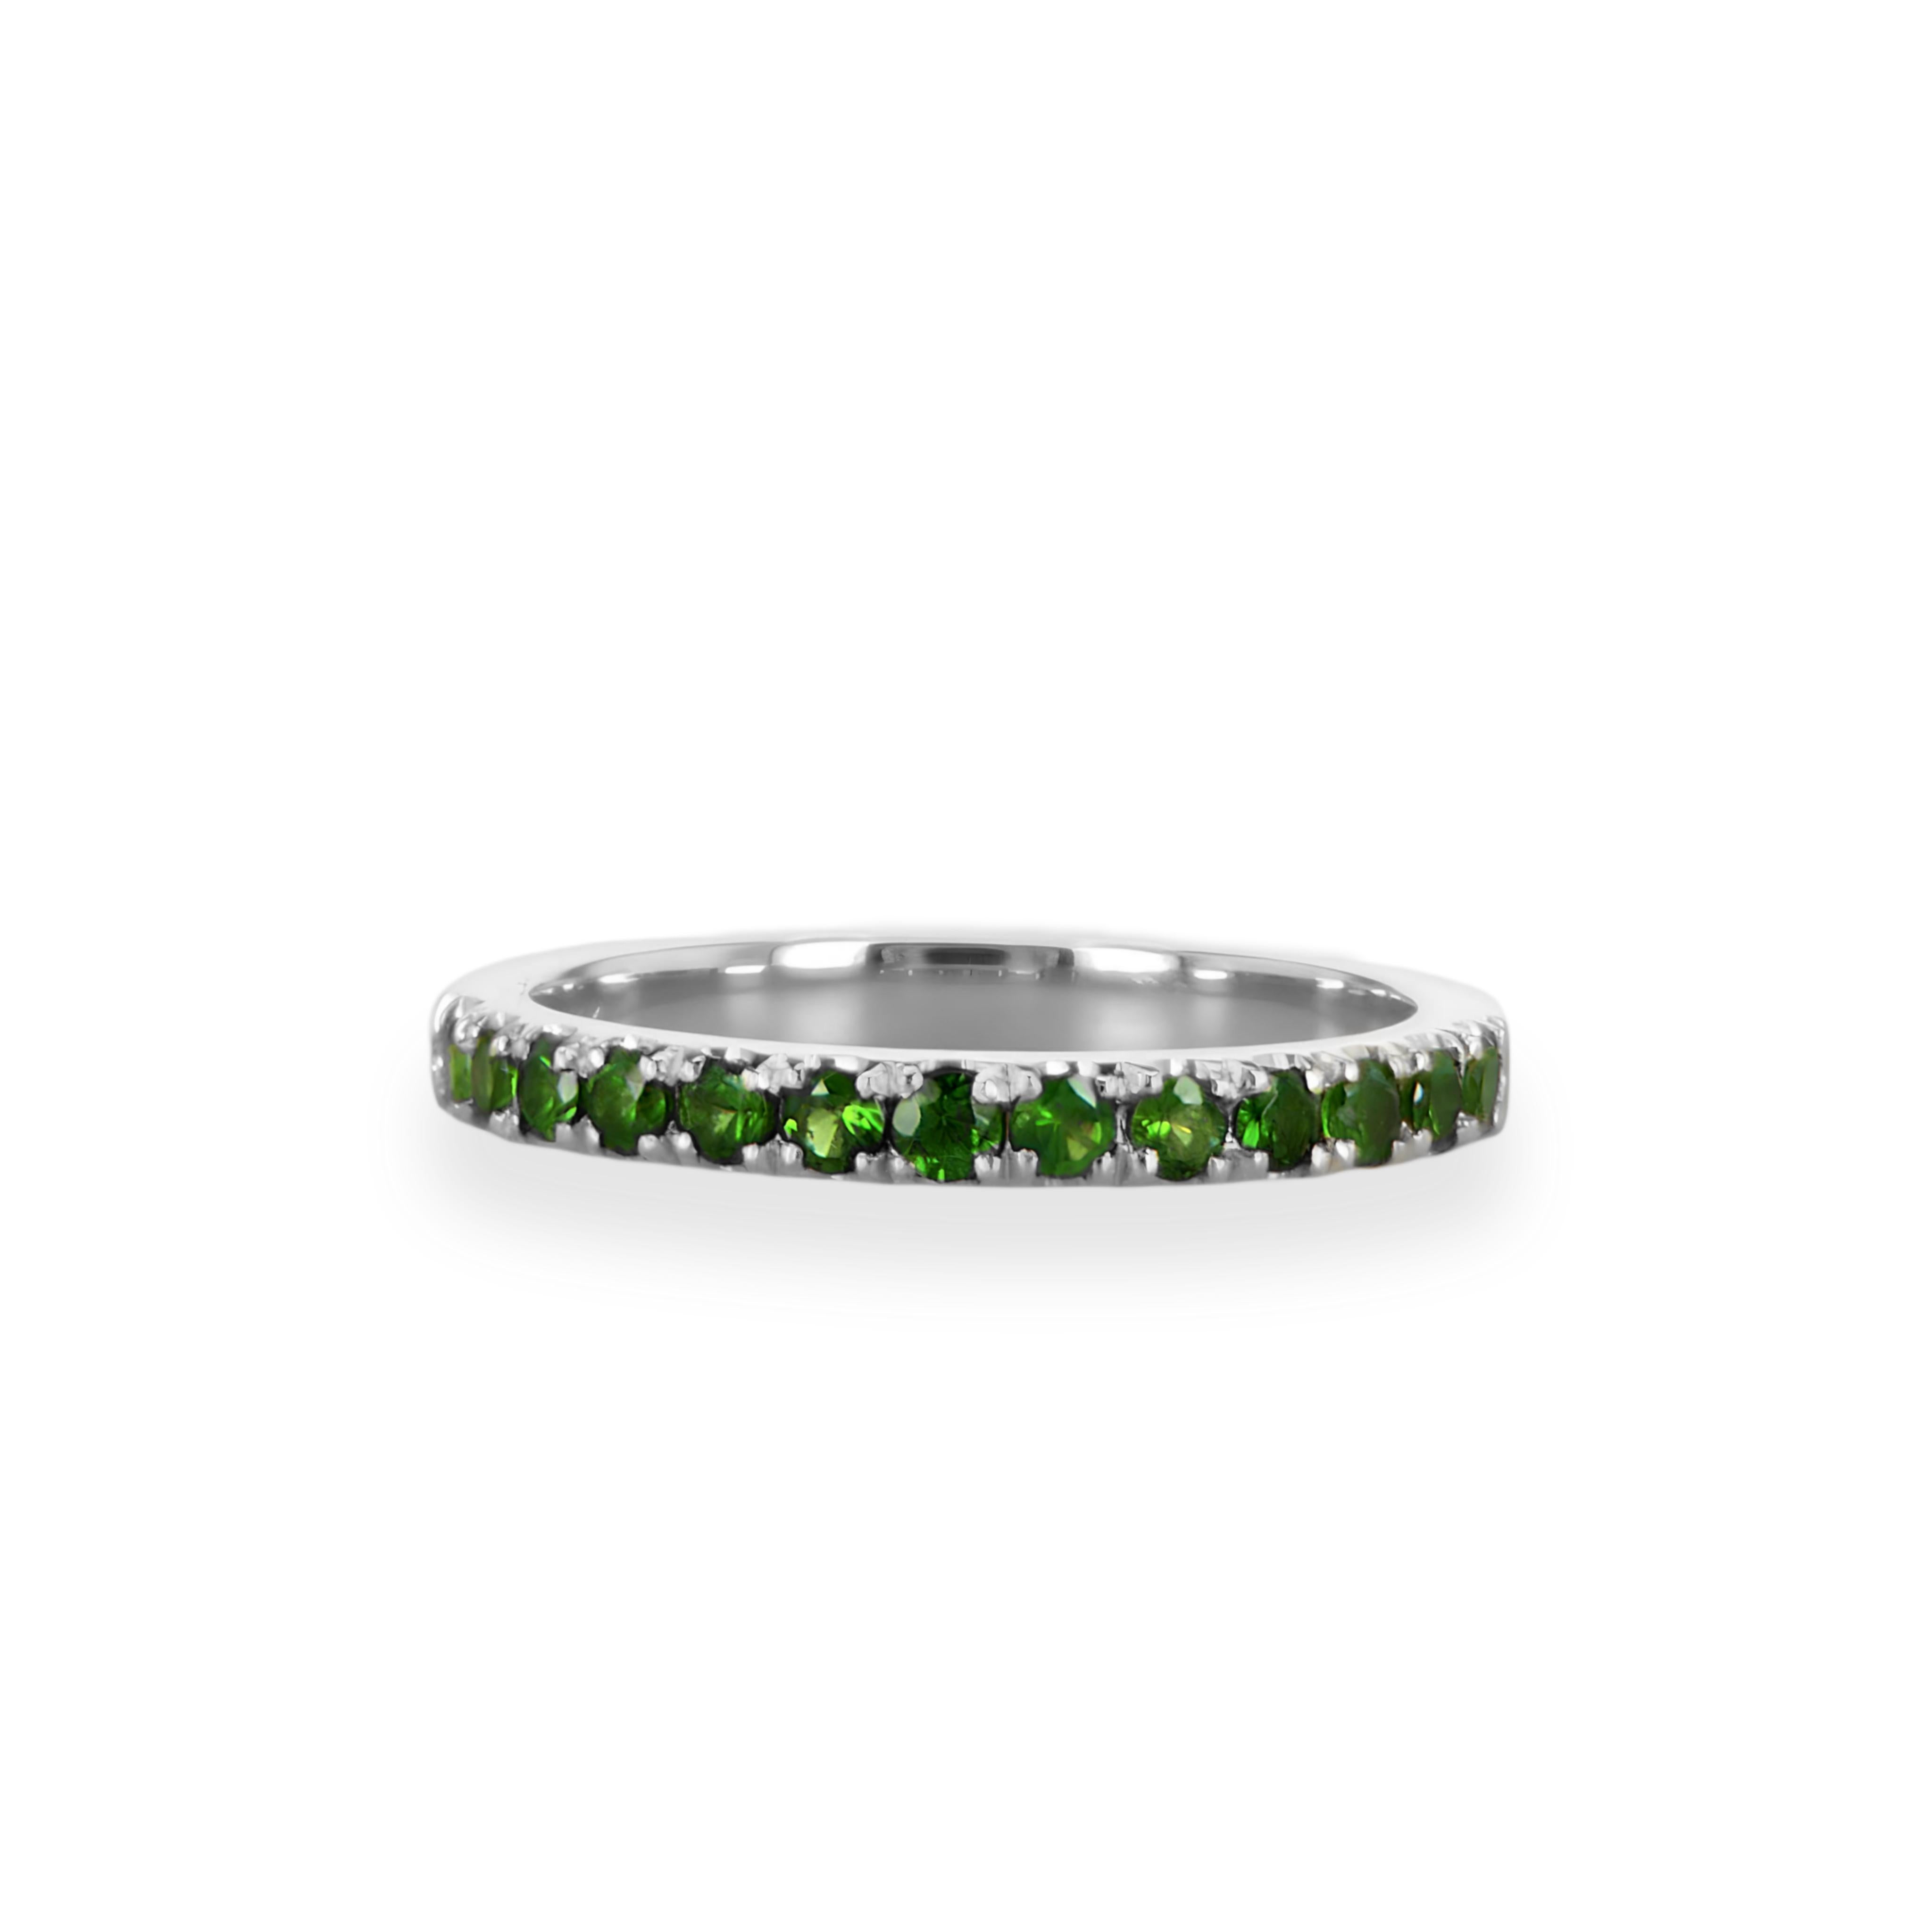 14K White Gold 0.54Ct Natural Round Tsavorite Half Eternity Radiance Ring

Product Description:

Indulge in the symphony of luxury and rarity with our exquisite 0.54Ct Natural Round Tsavorite Half Eternity Ring, meticulously crafted in premium 14K